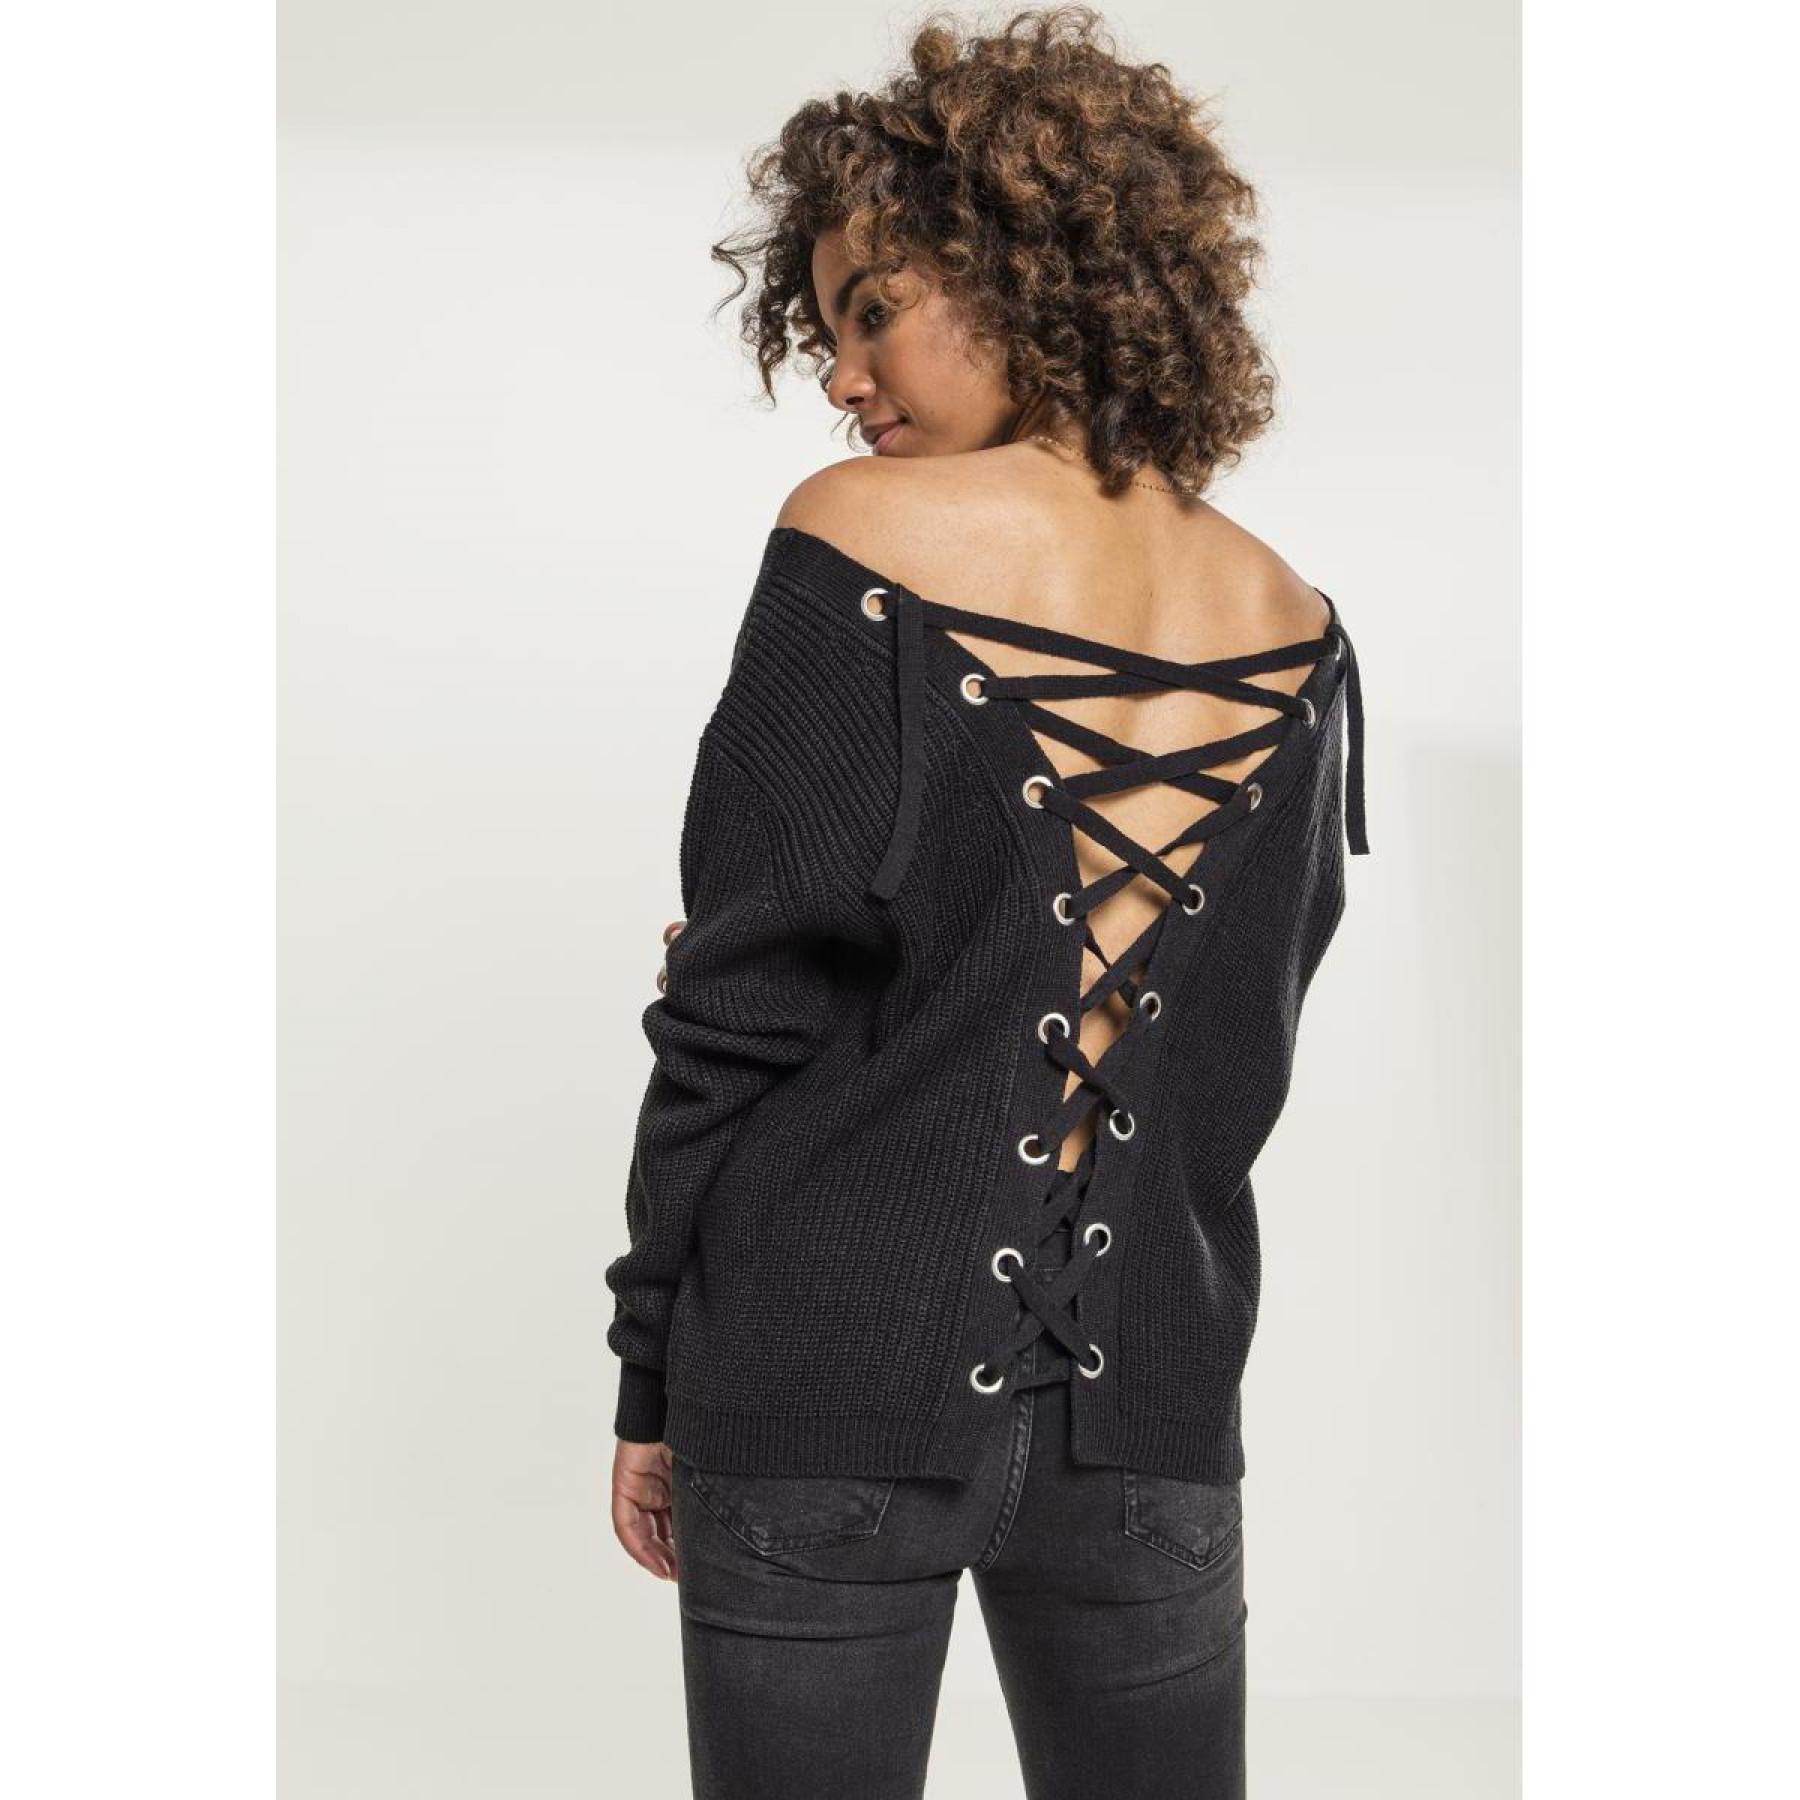 Sweatshirt femme grandes tailles Urban Classic back lace up